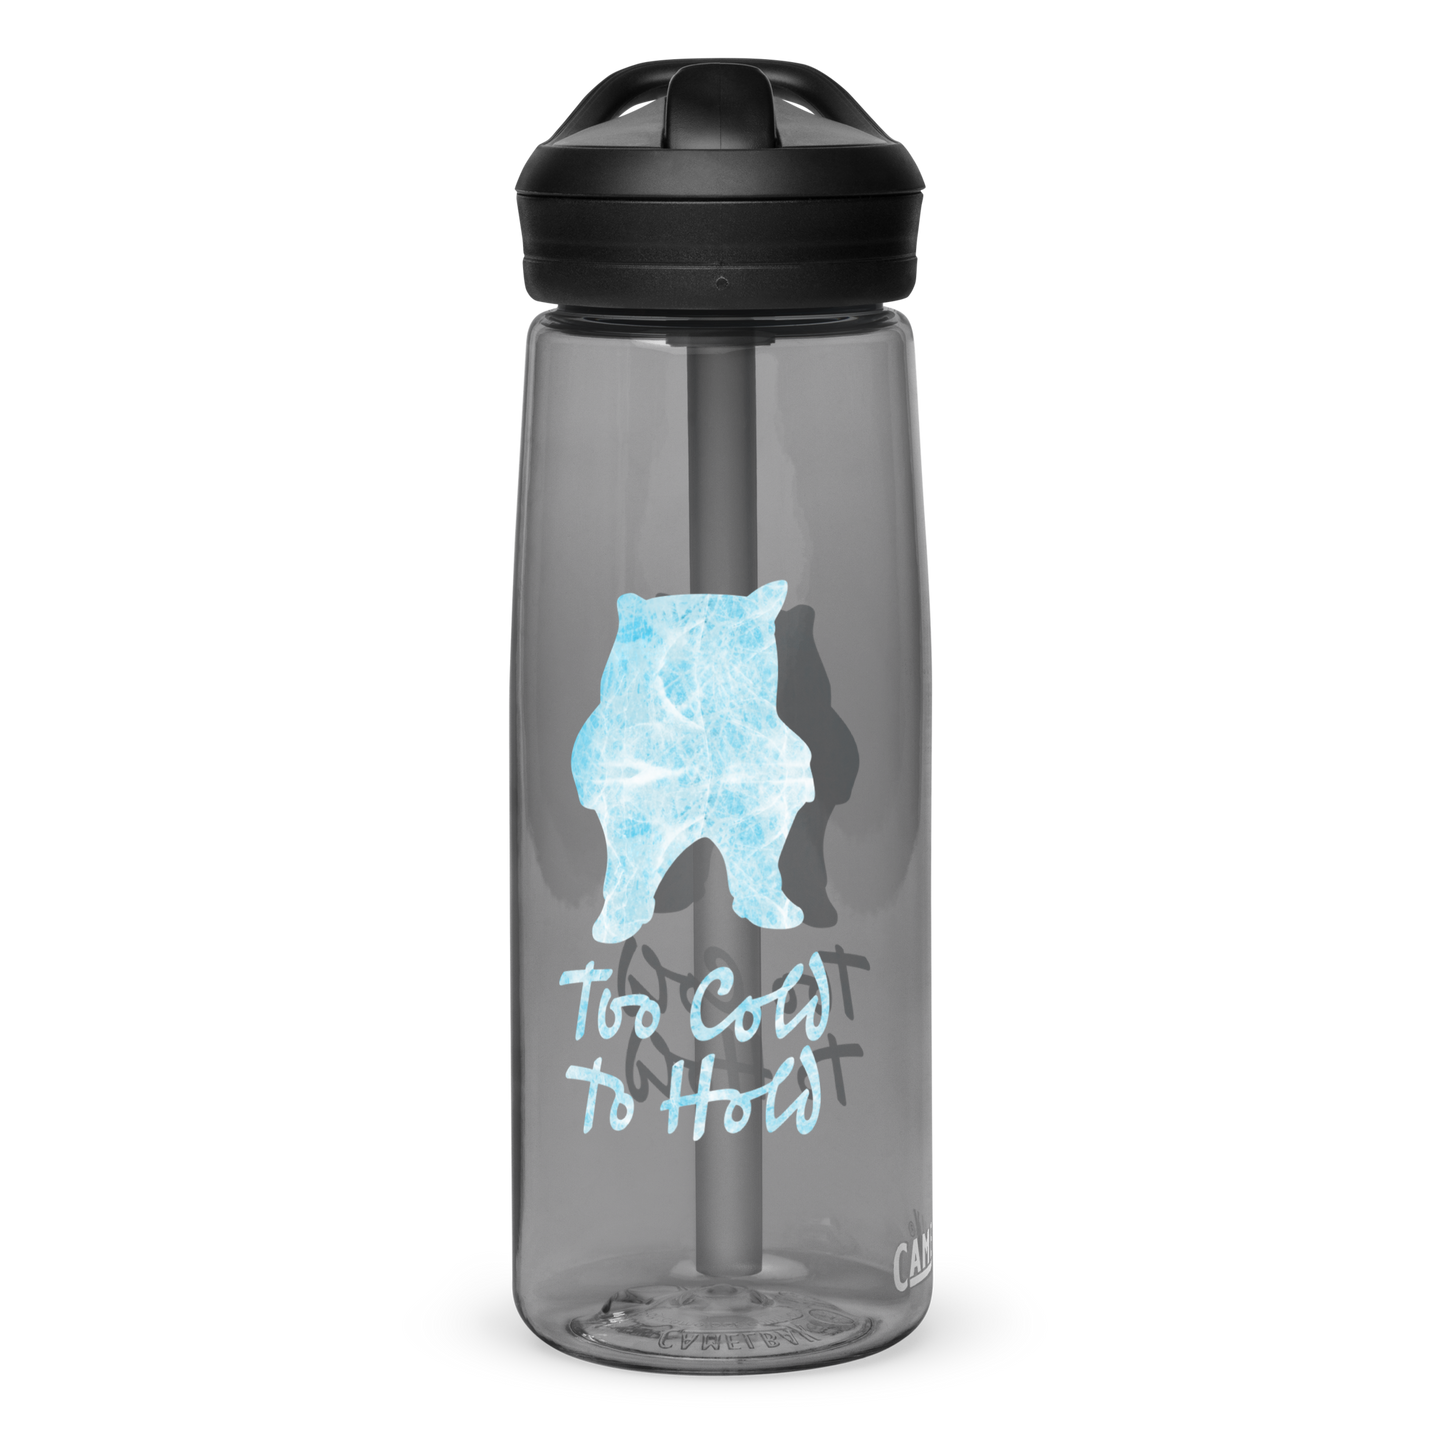 NAFO Too Cold Water Bottle